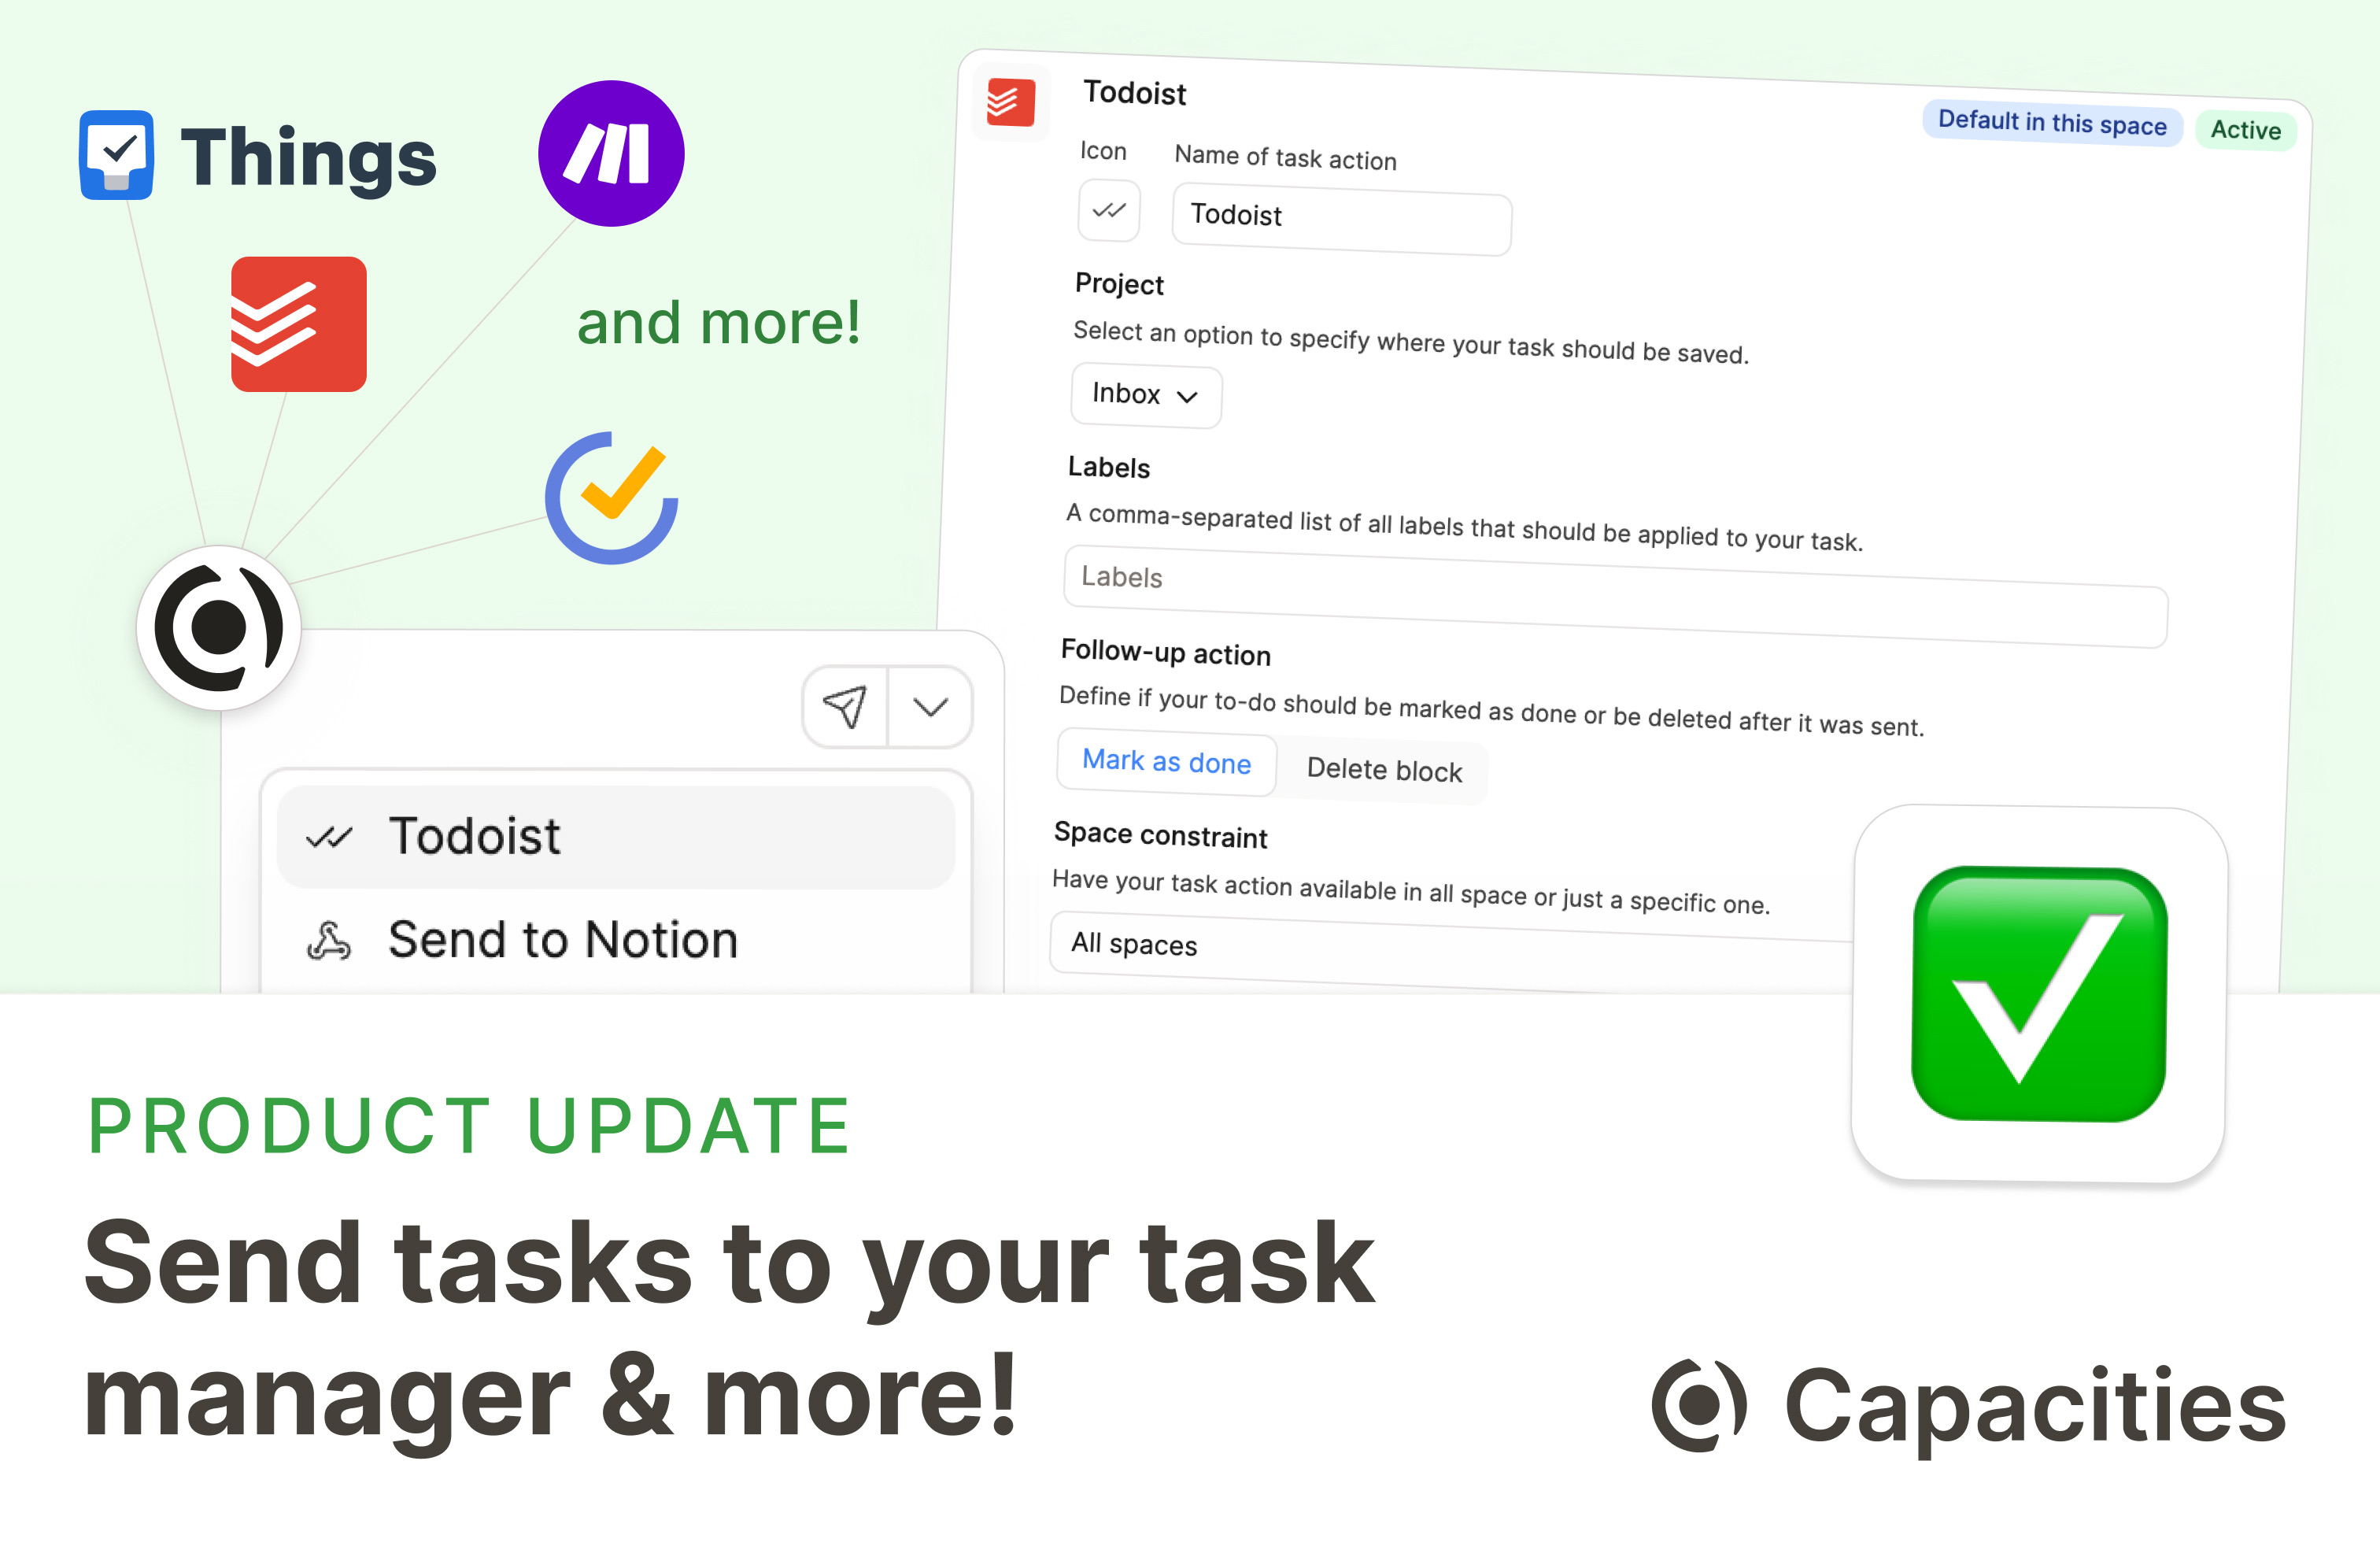 Send tasks to your task manager & more!